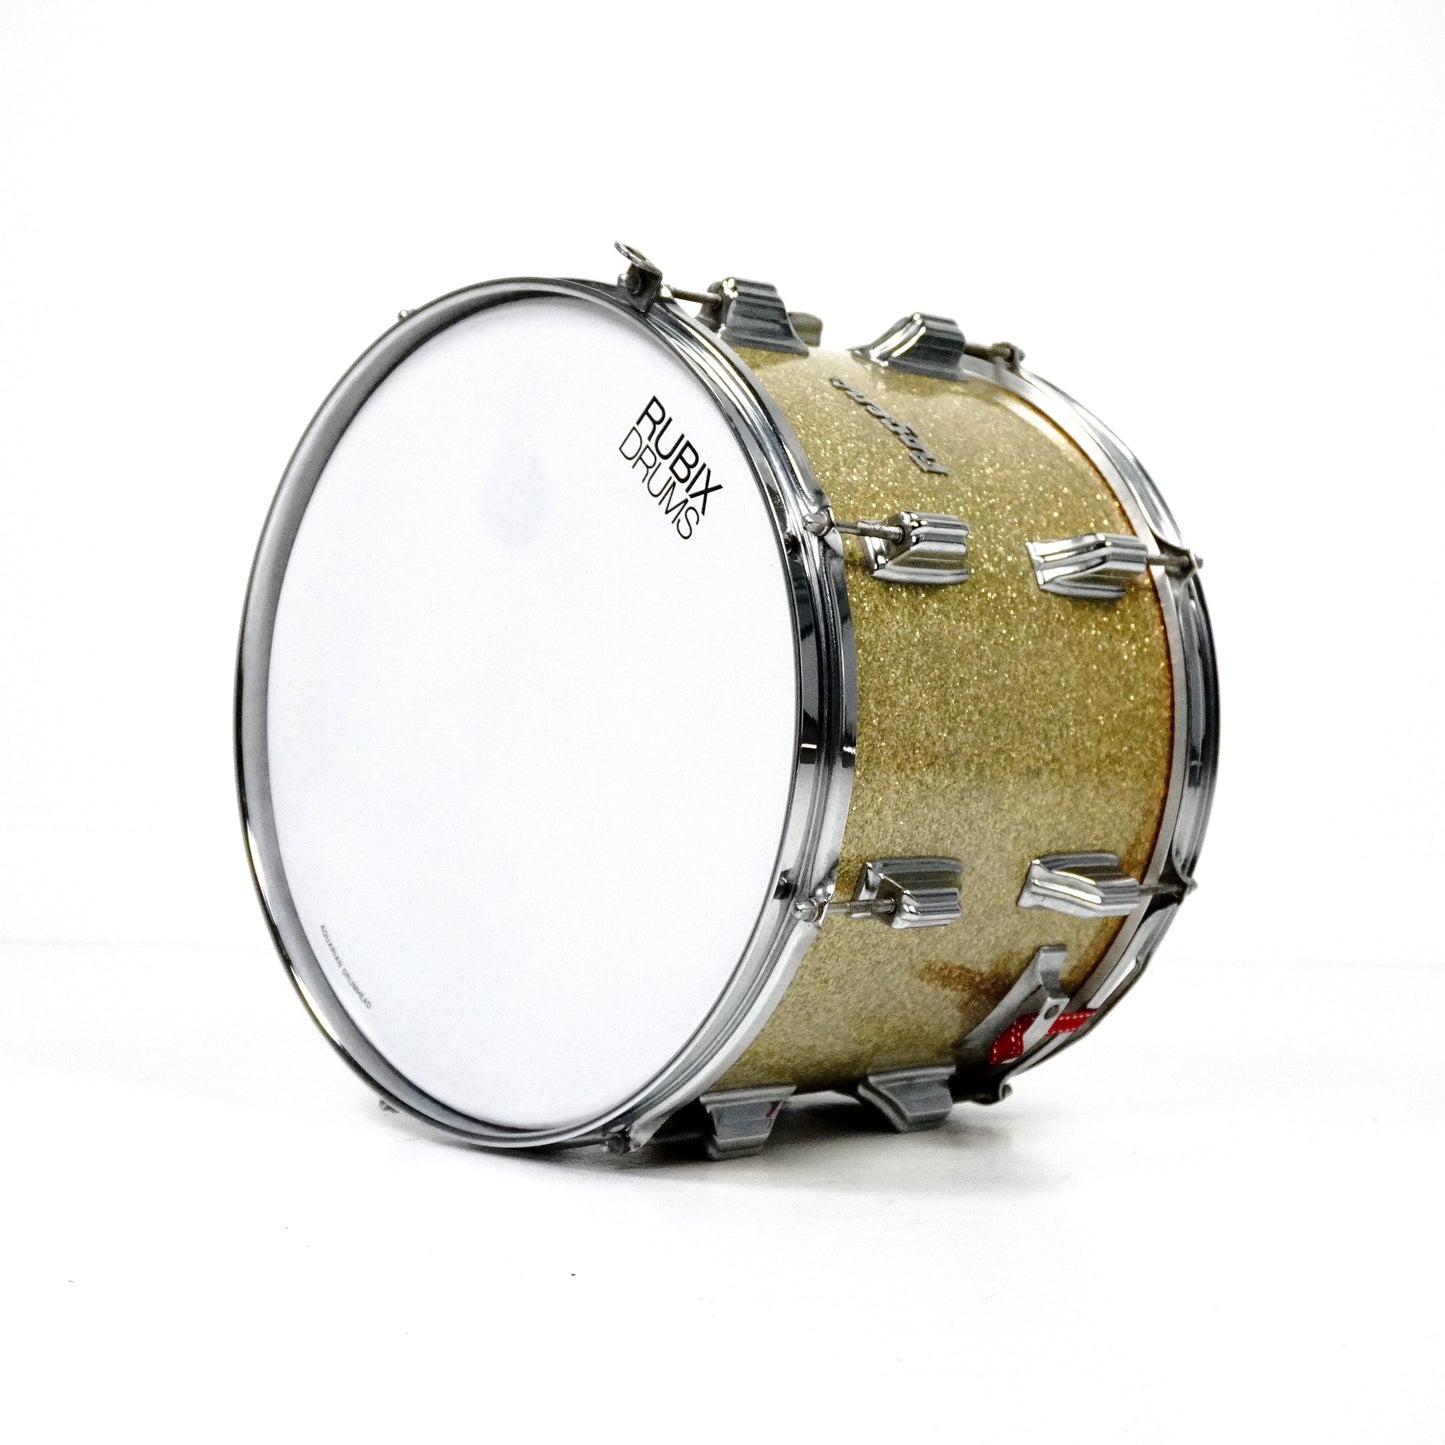 Rogers 14" x 10" Powertone Snare in Sparkling Gold